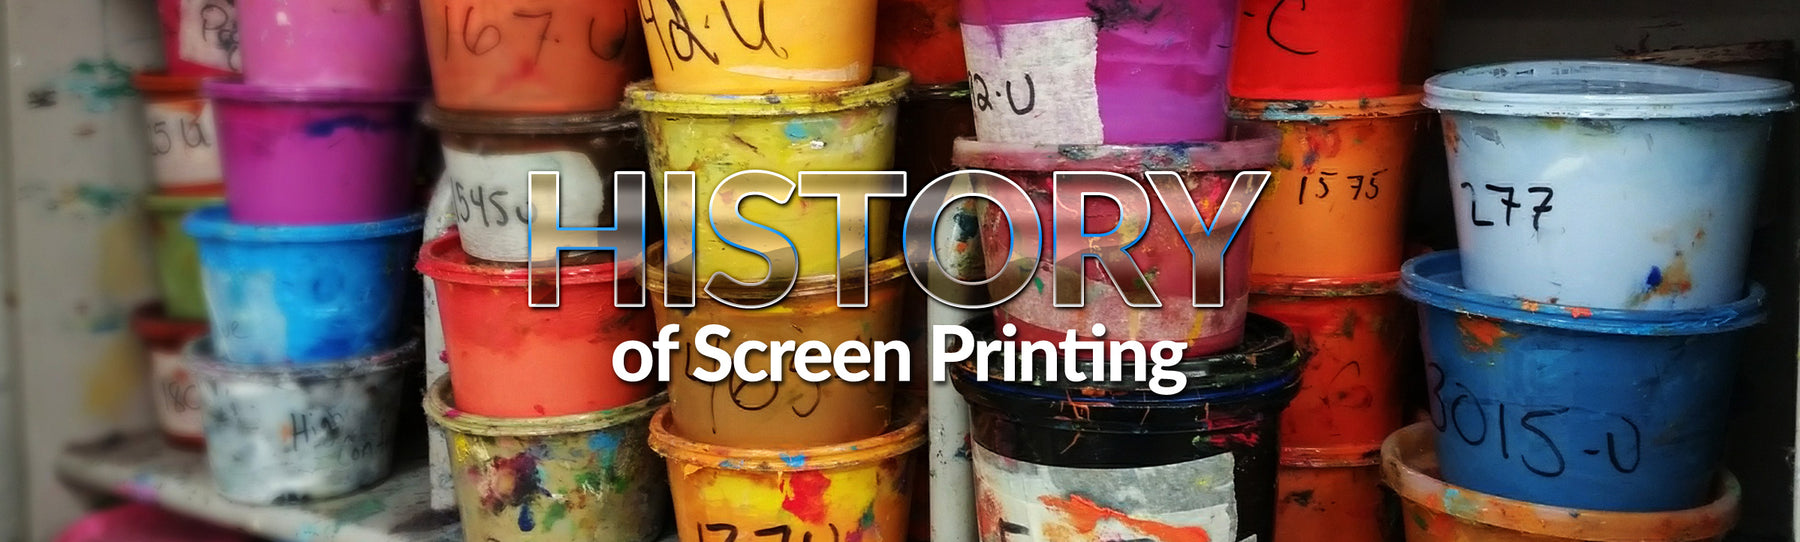 The History of Screen Printing